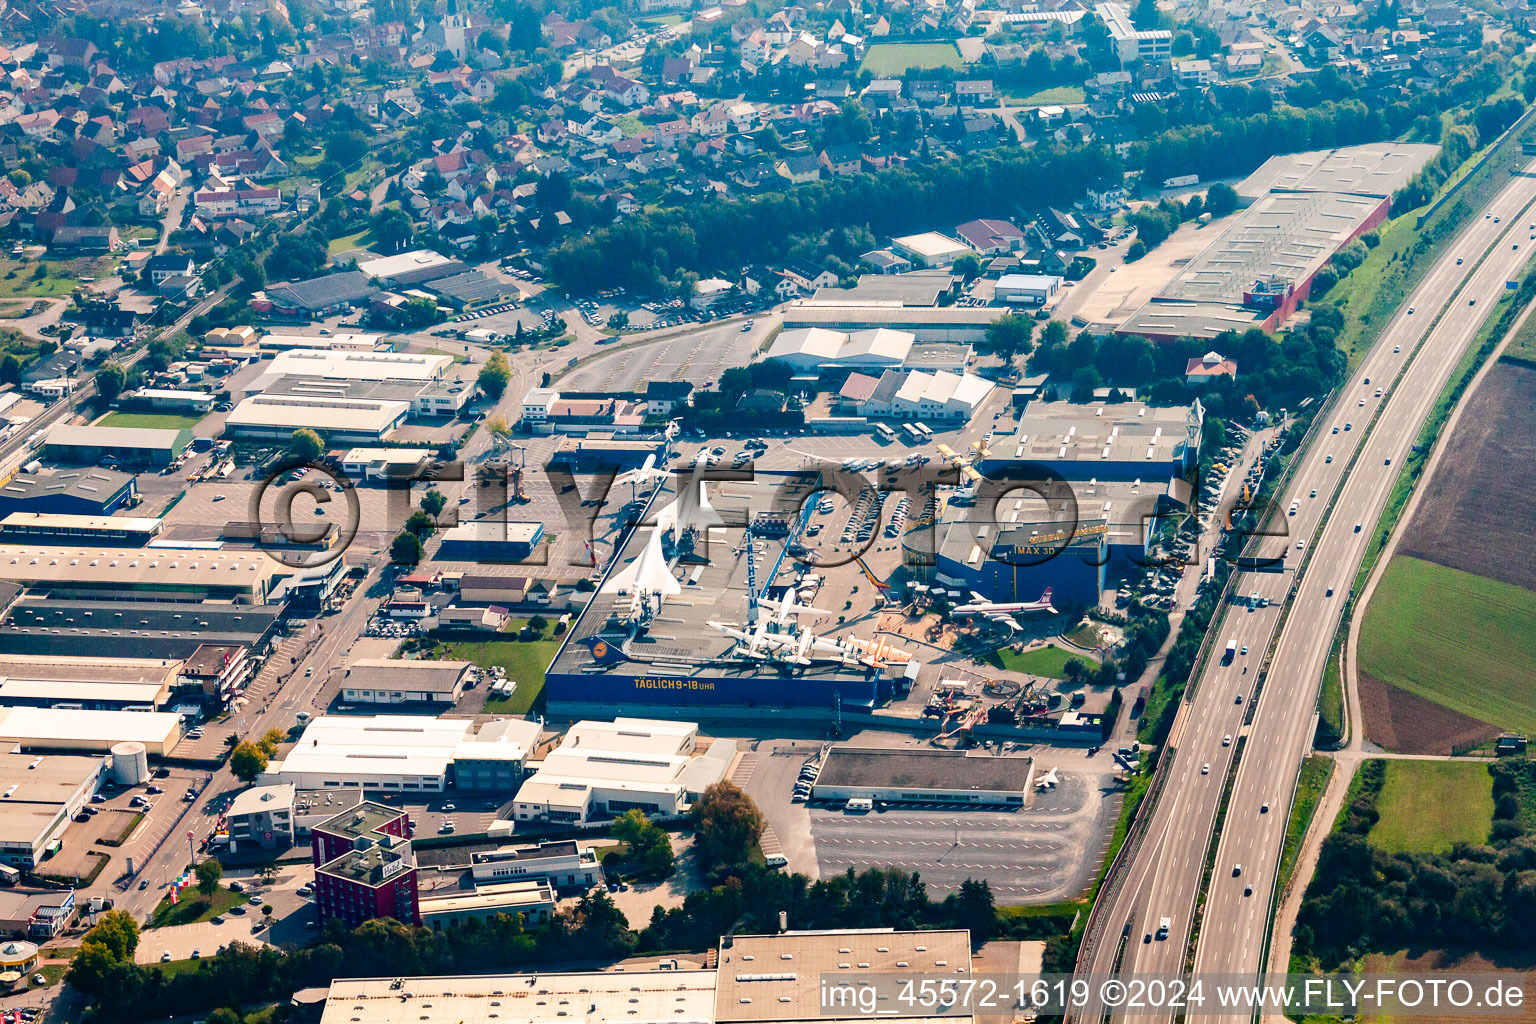 Technology Museum in the district Steinsfurt in Sinsheim in the state Baden-Wuerttemberg, Germany from the plane